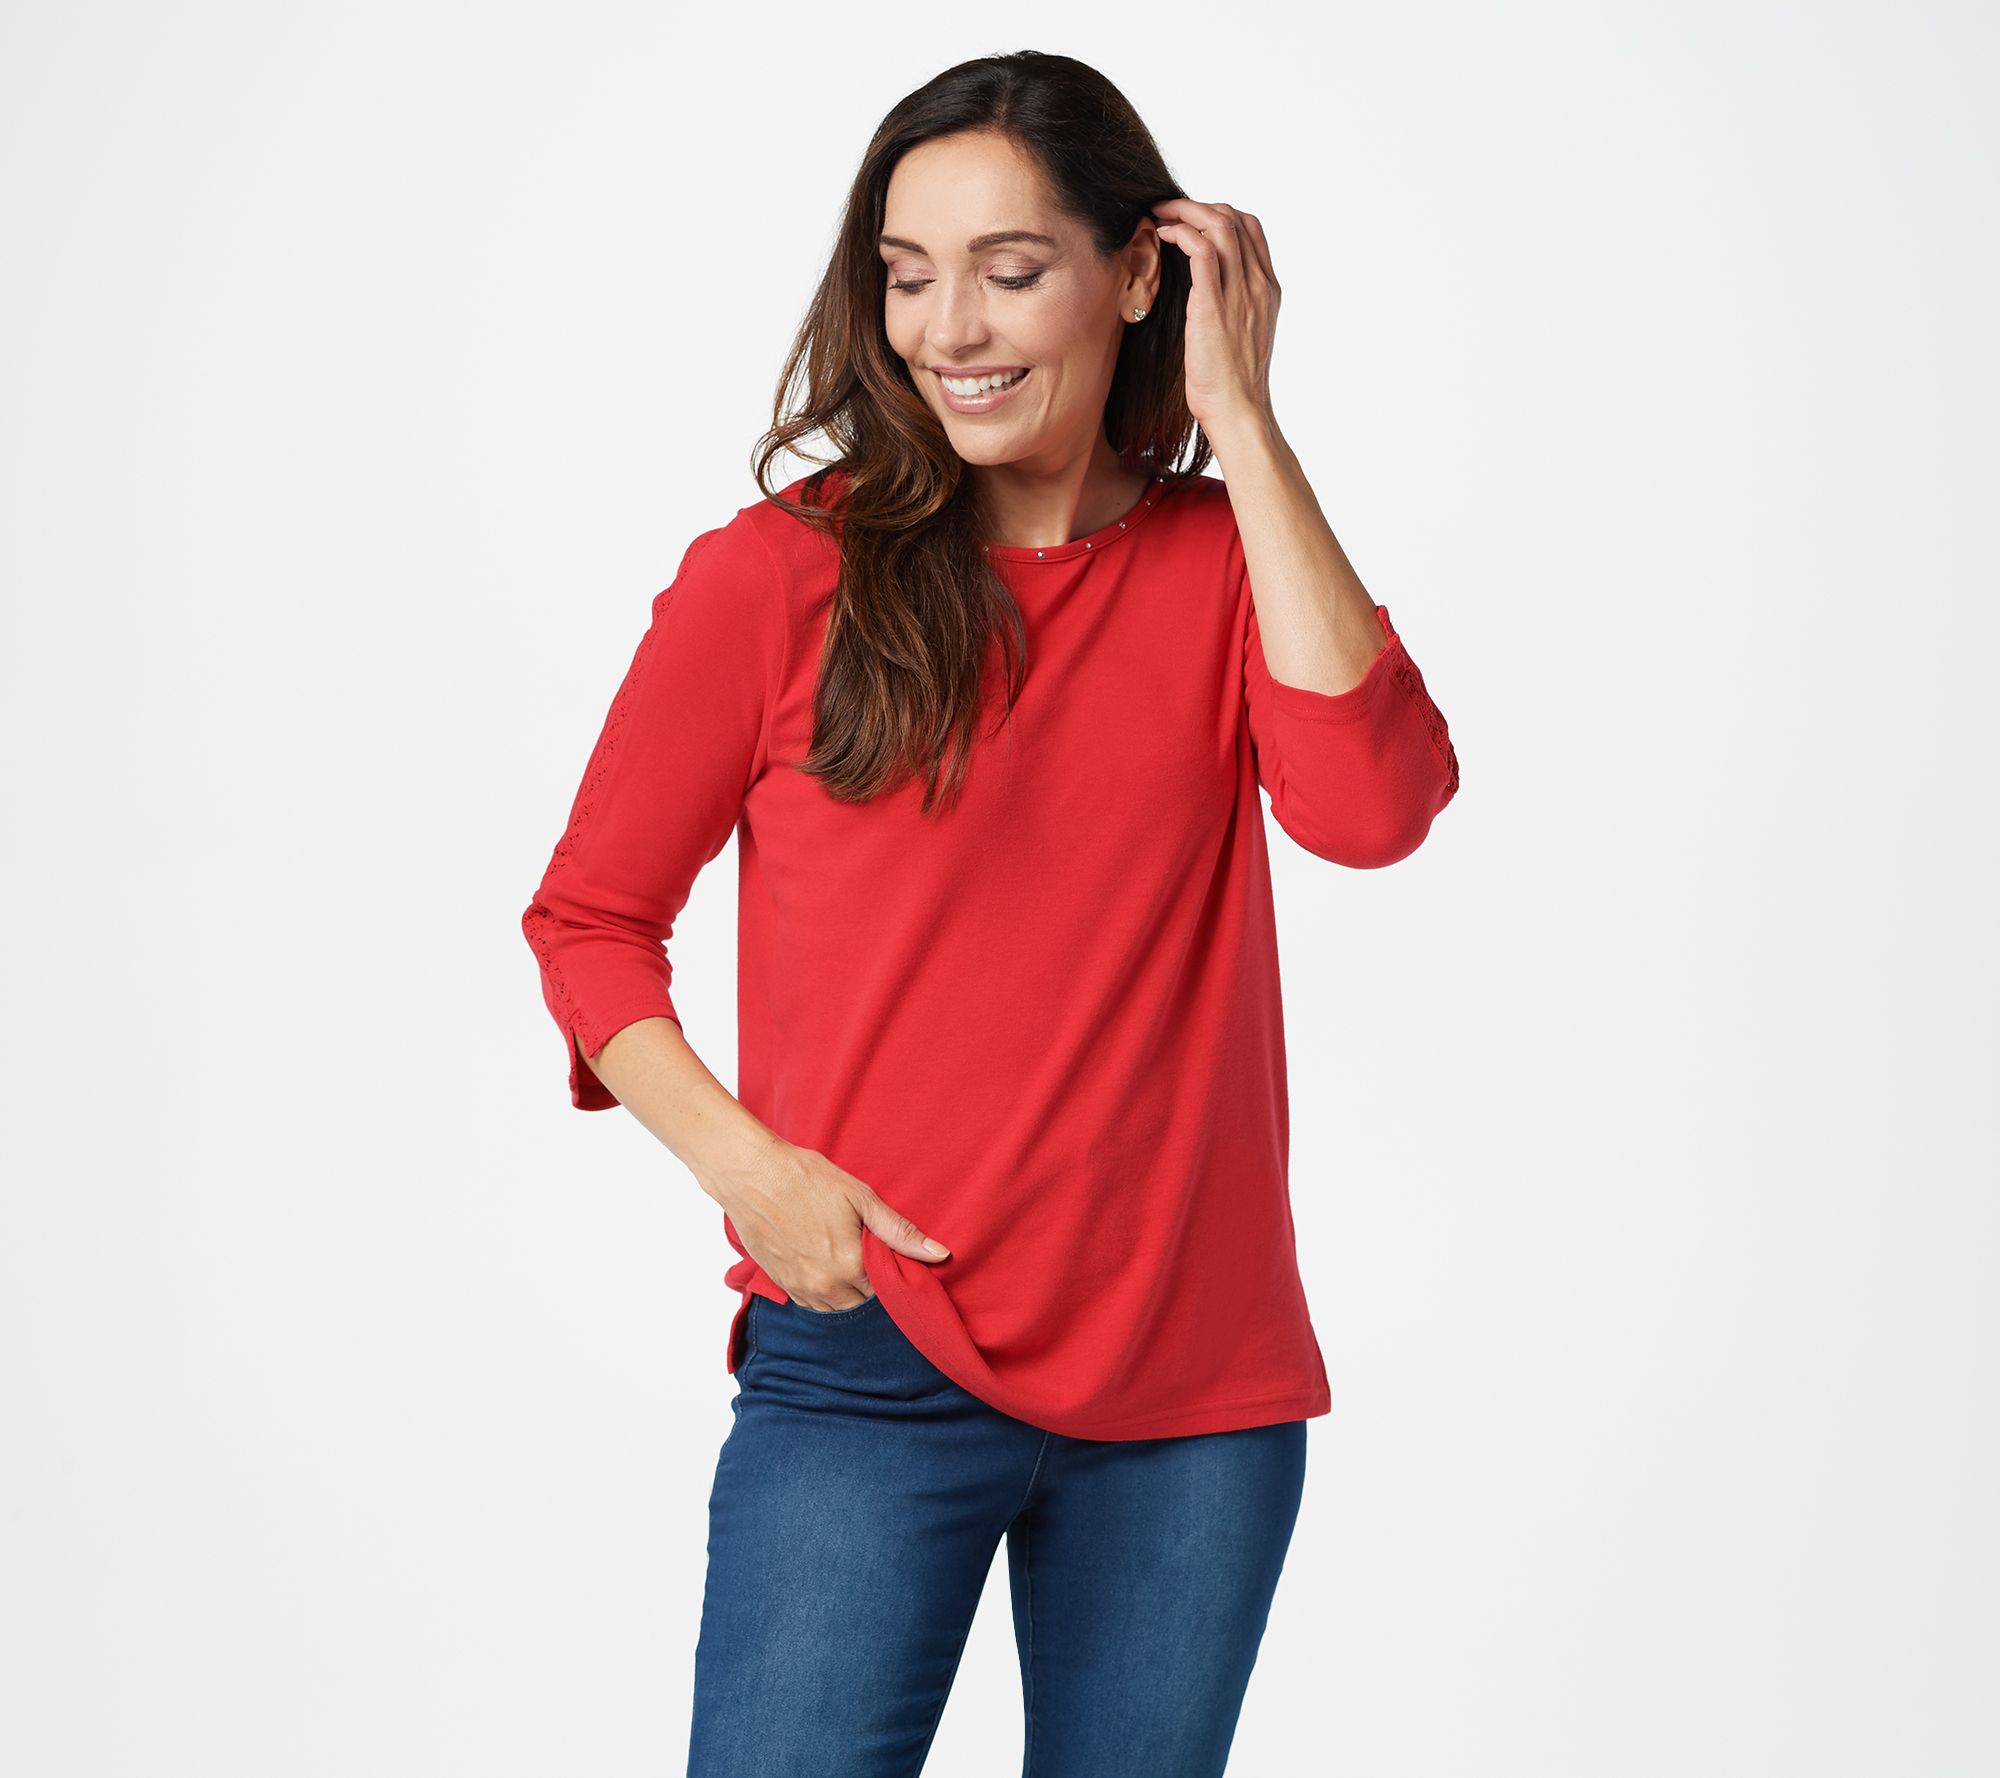 Quacker Factory 3/4-Sleeve Top with Lace and Rhinestone Detail - QVC.com